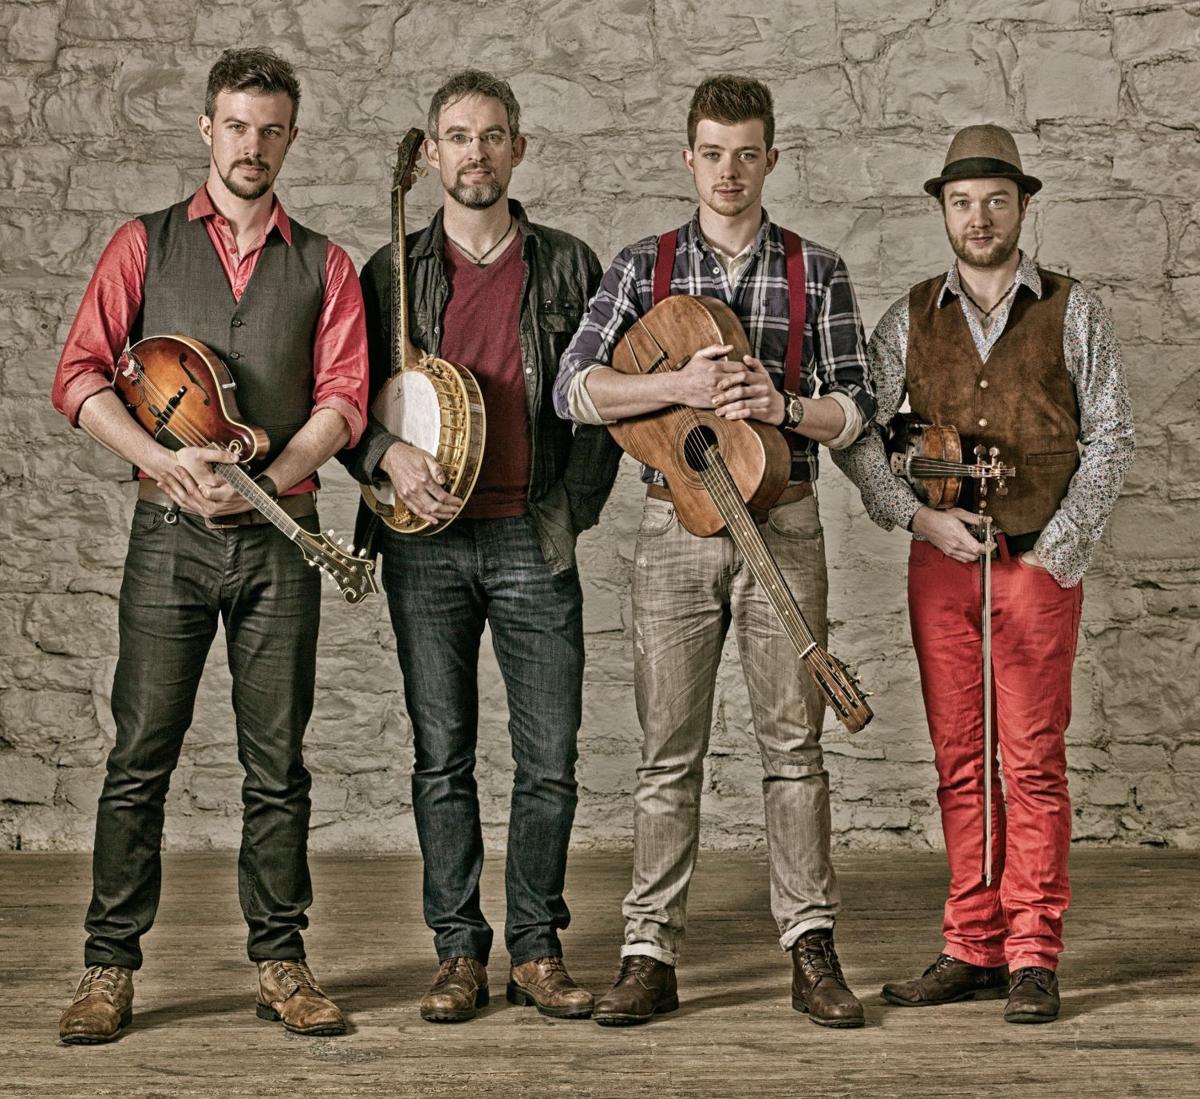 We Banjo 3 pick from Irish and American influences Music host